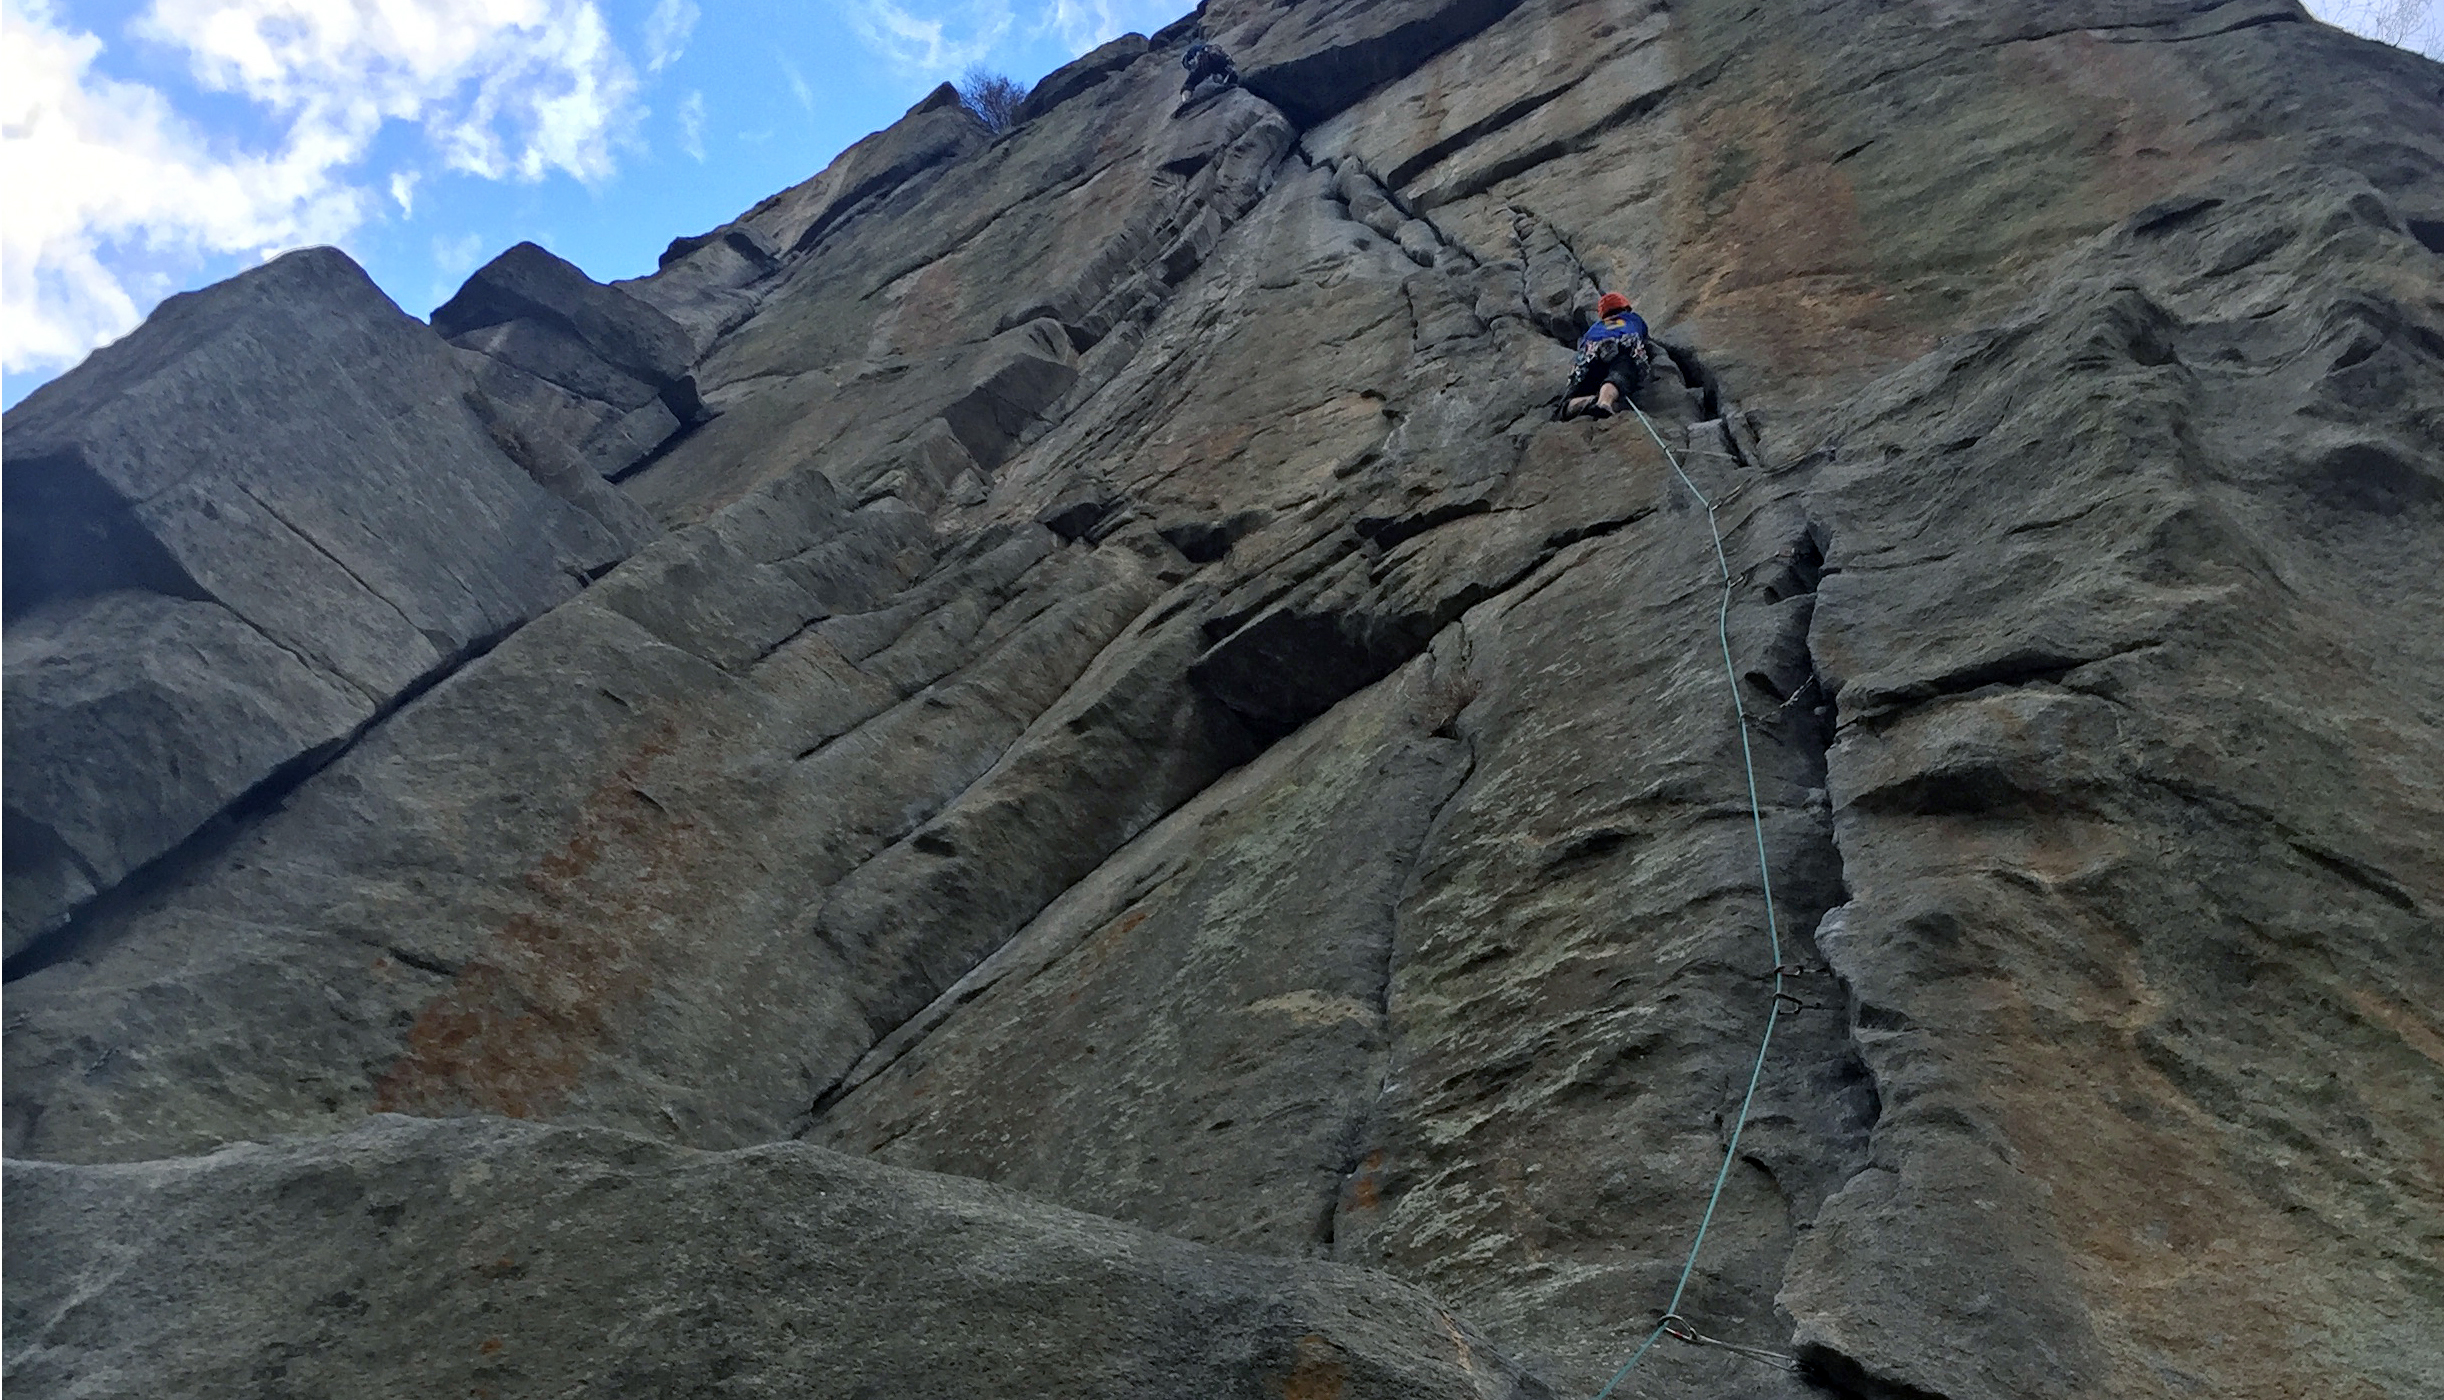 Peter Holben leads Country Club Crack (5.11b/c) at Castle Rock in Boulder Canyon, Colorado, in one 150-foot pitch. [Photo] Chris Van Leuven